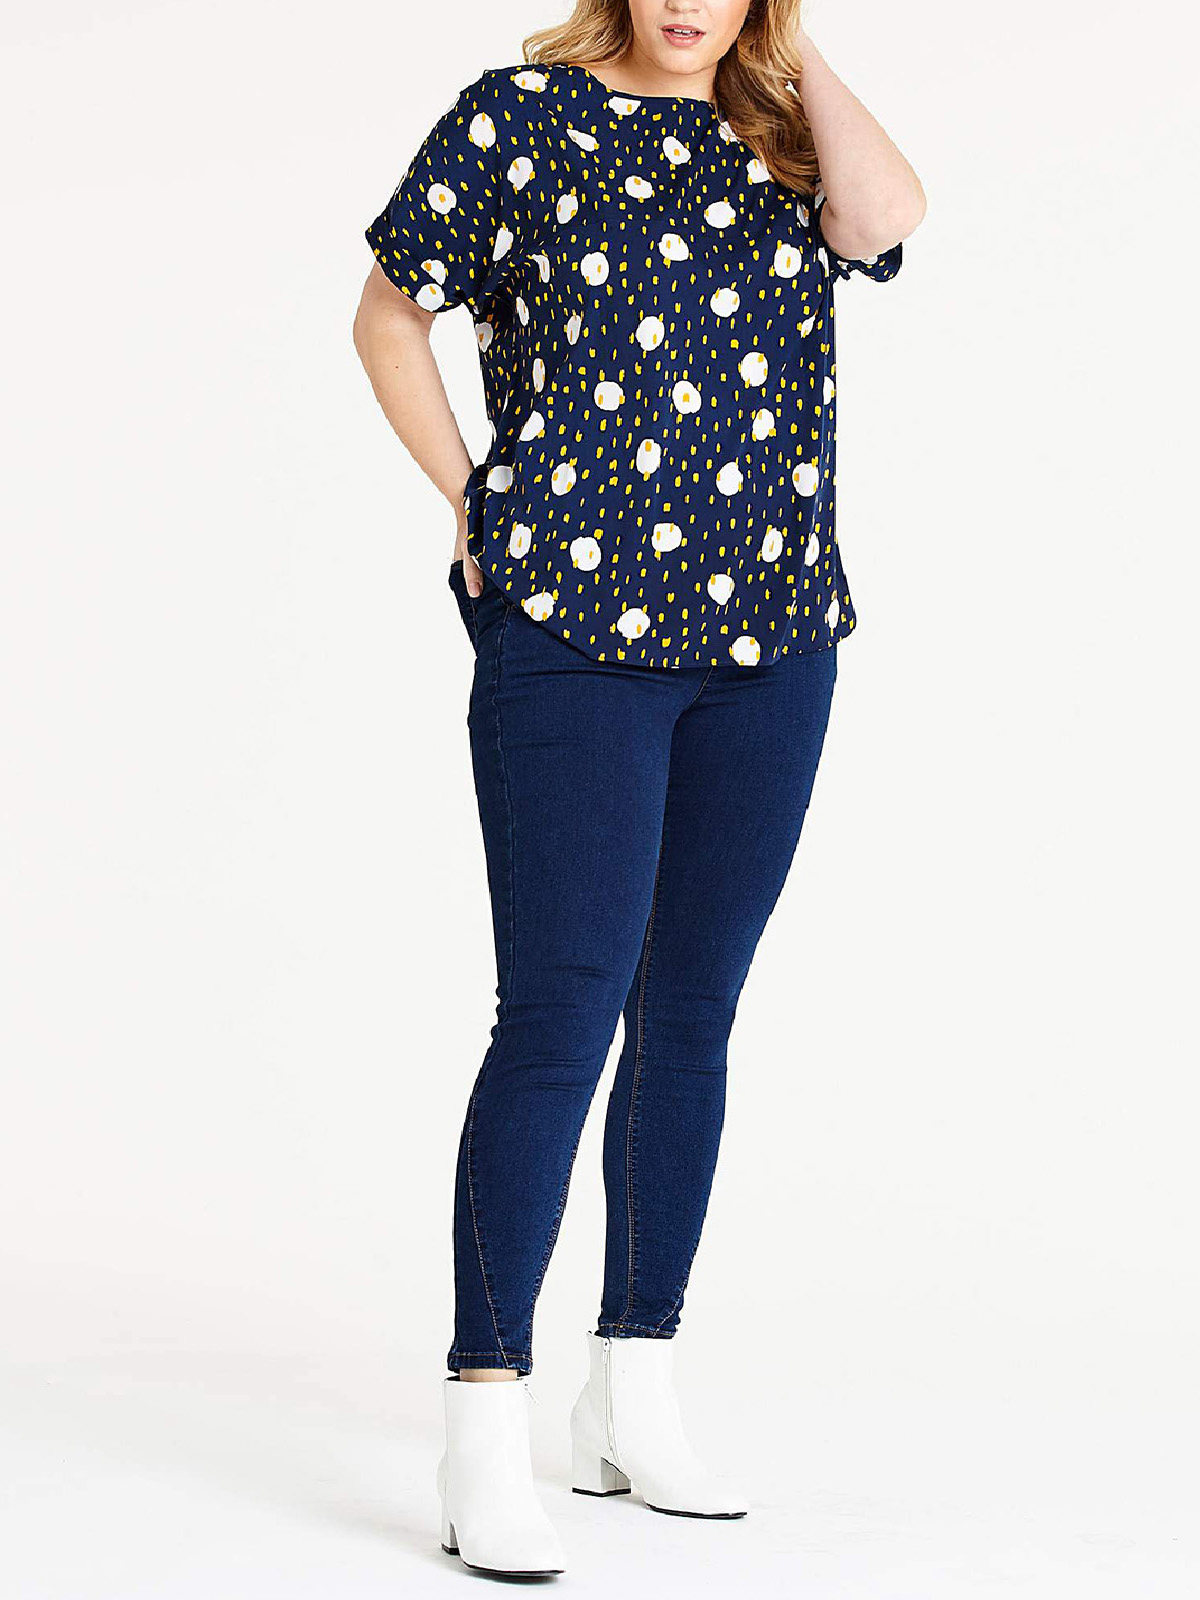 NAVY Printed Shell Top - Plus Size 14 to 16